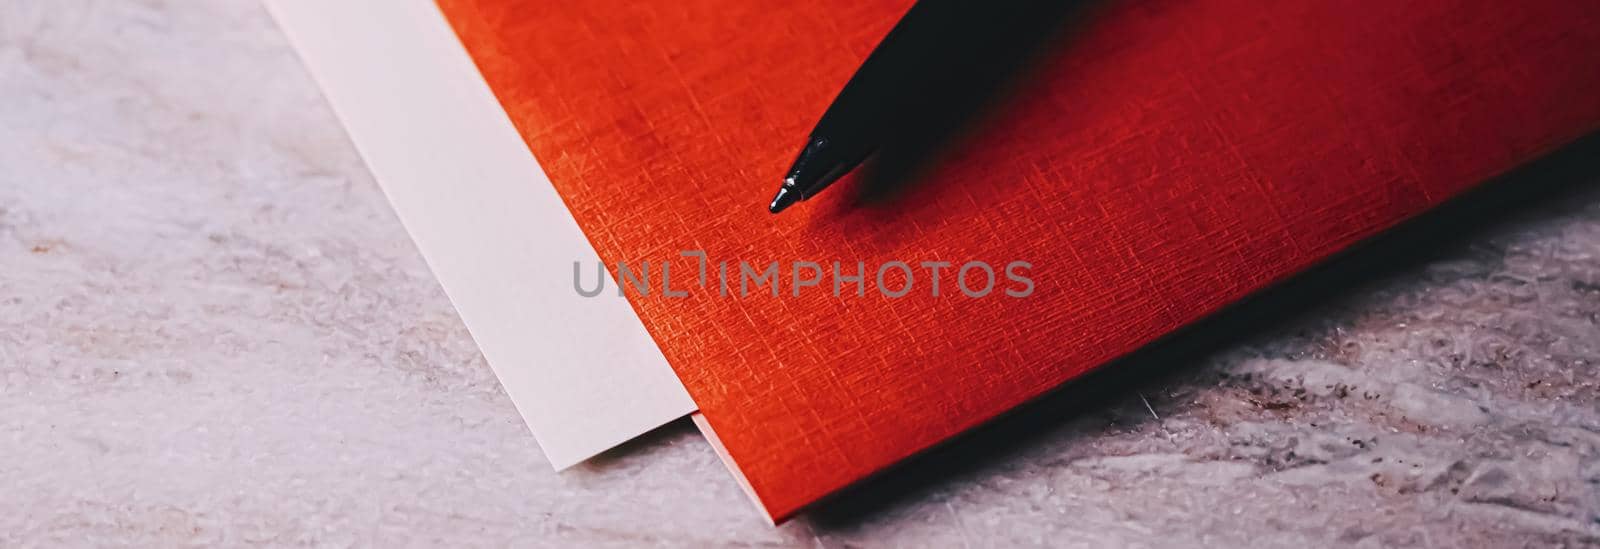 Pen and papers as office stationery, closeup